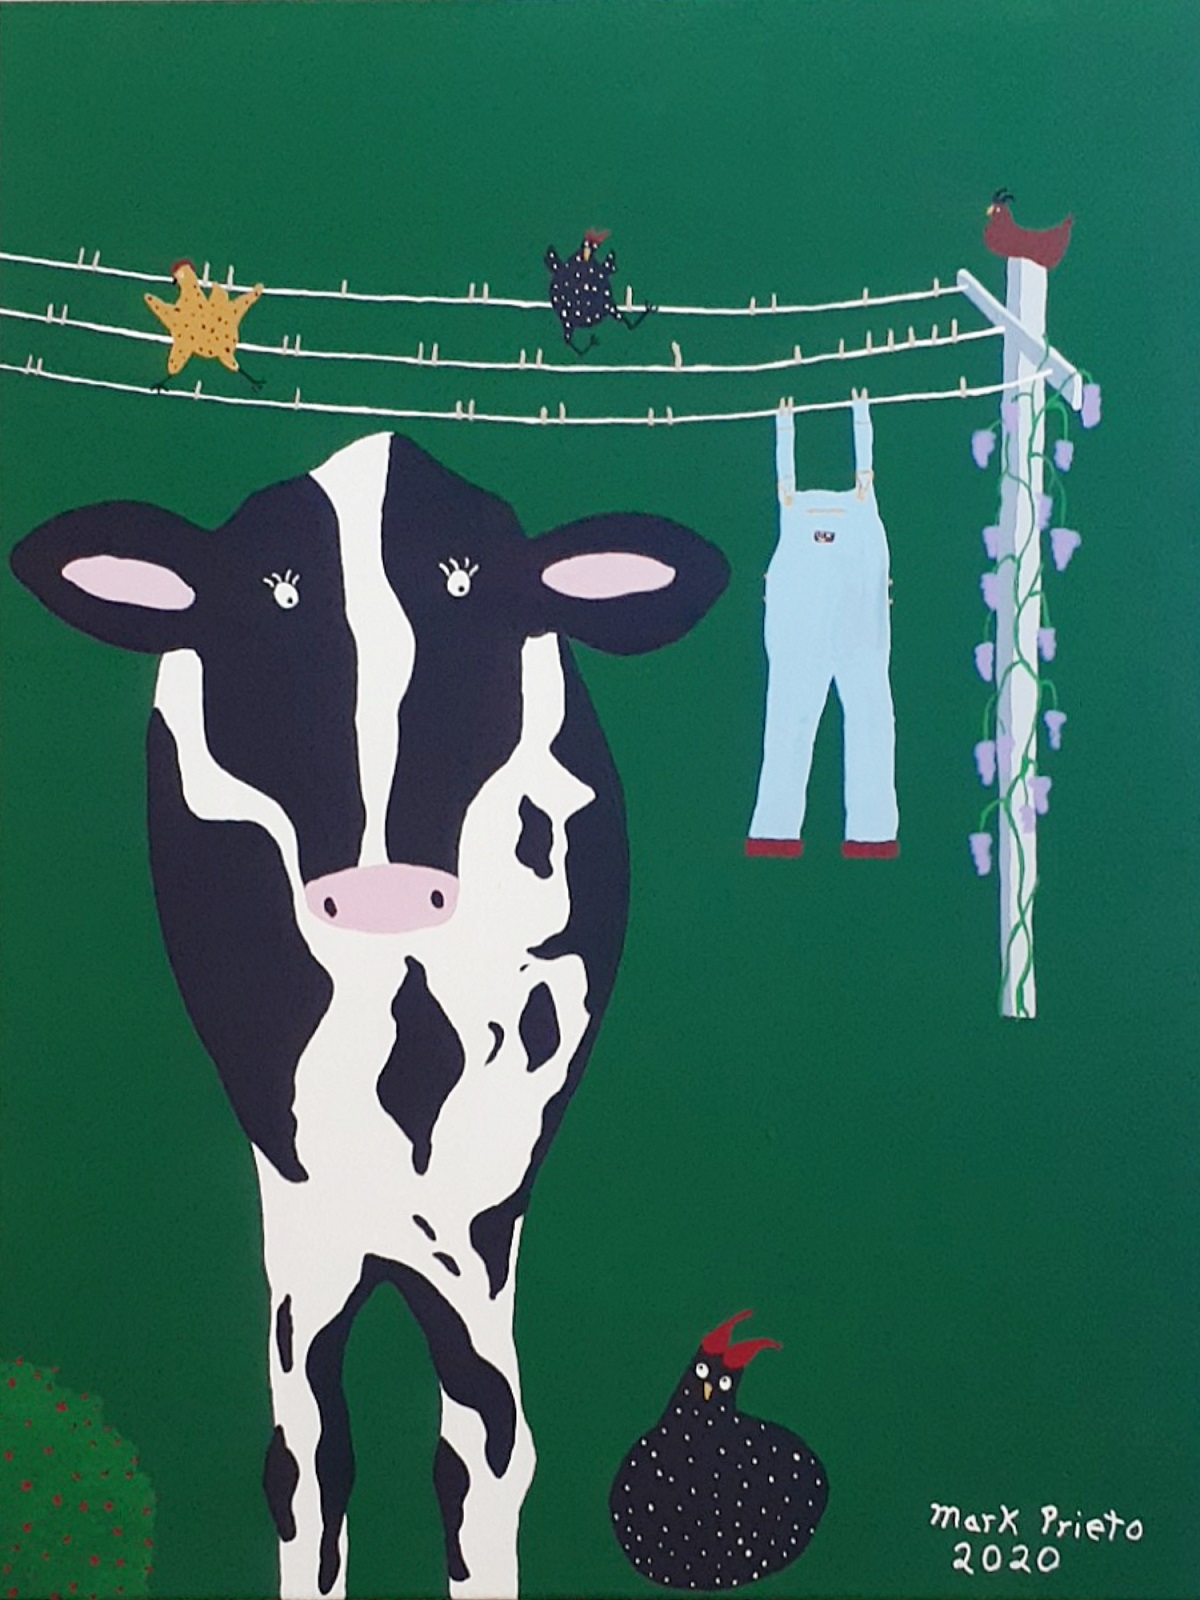 Cow with Overalls, work by Mark Prieto (MG: December 2020)